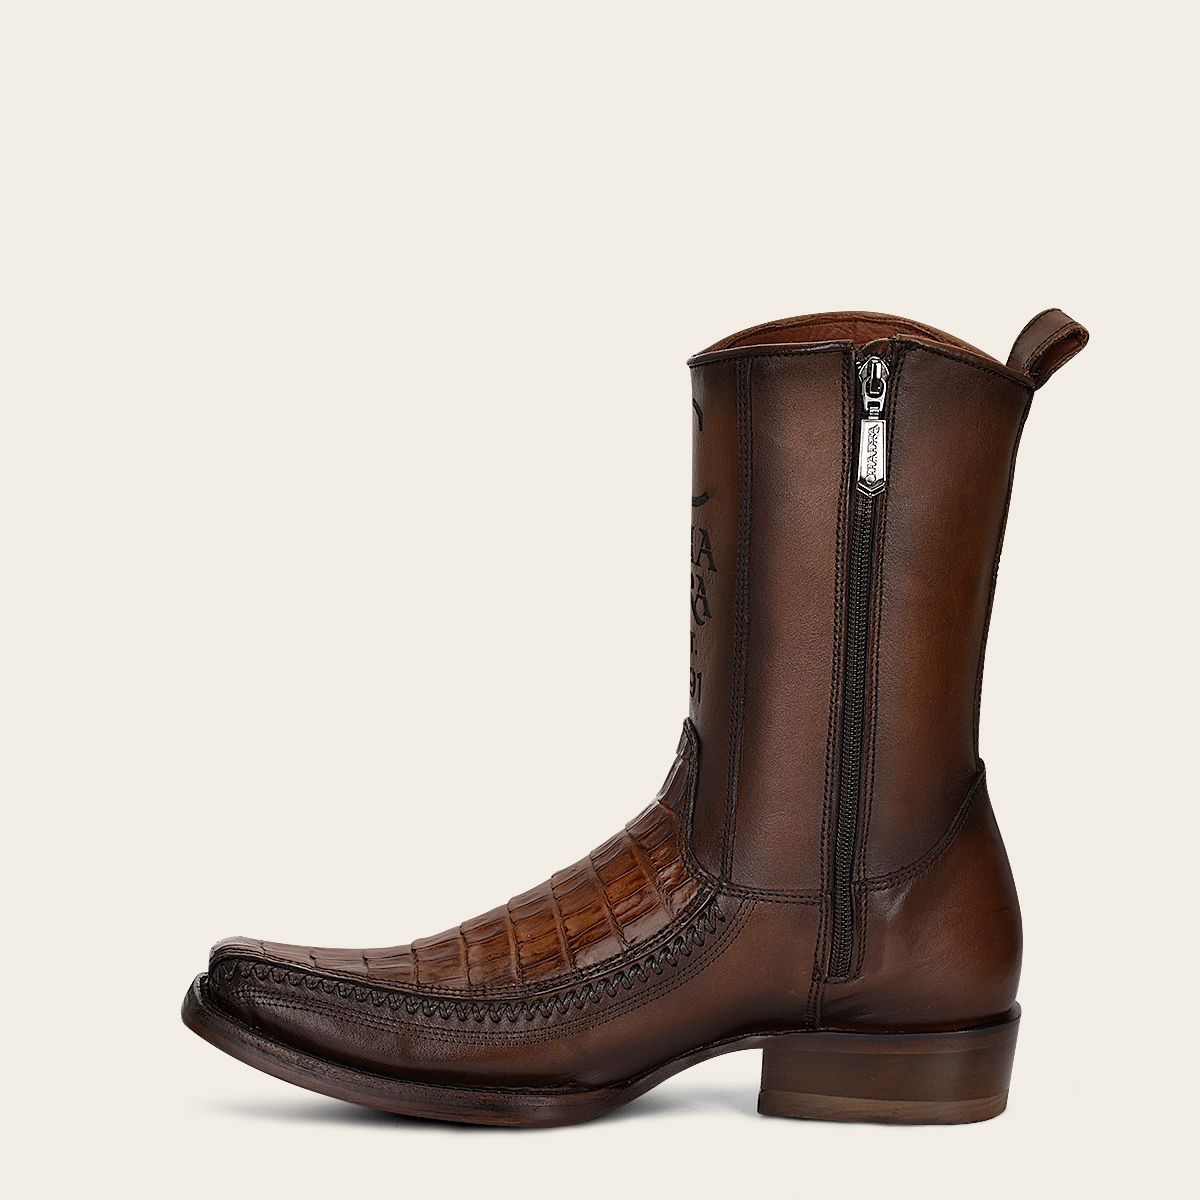 Brown exotic leather cowboy boots